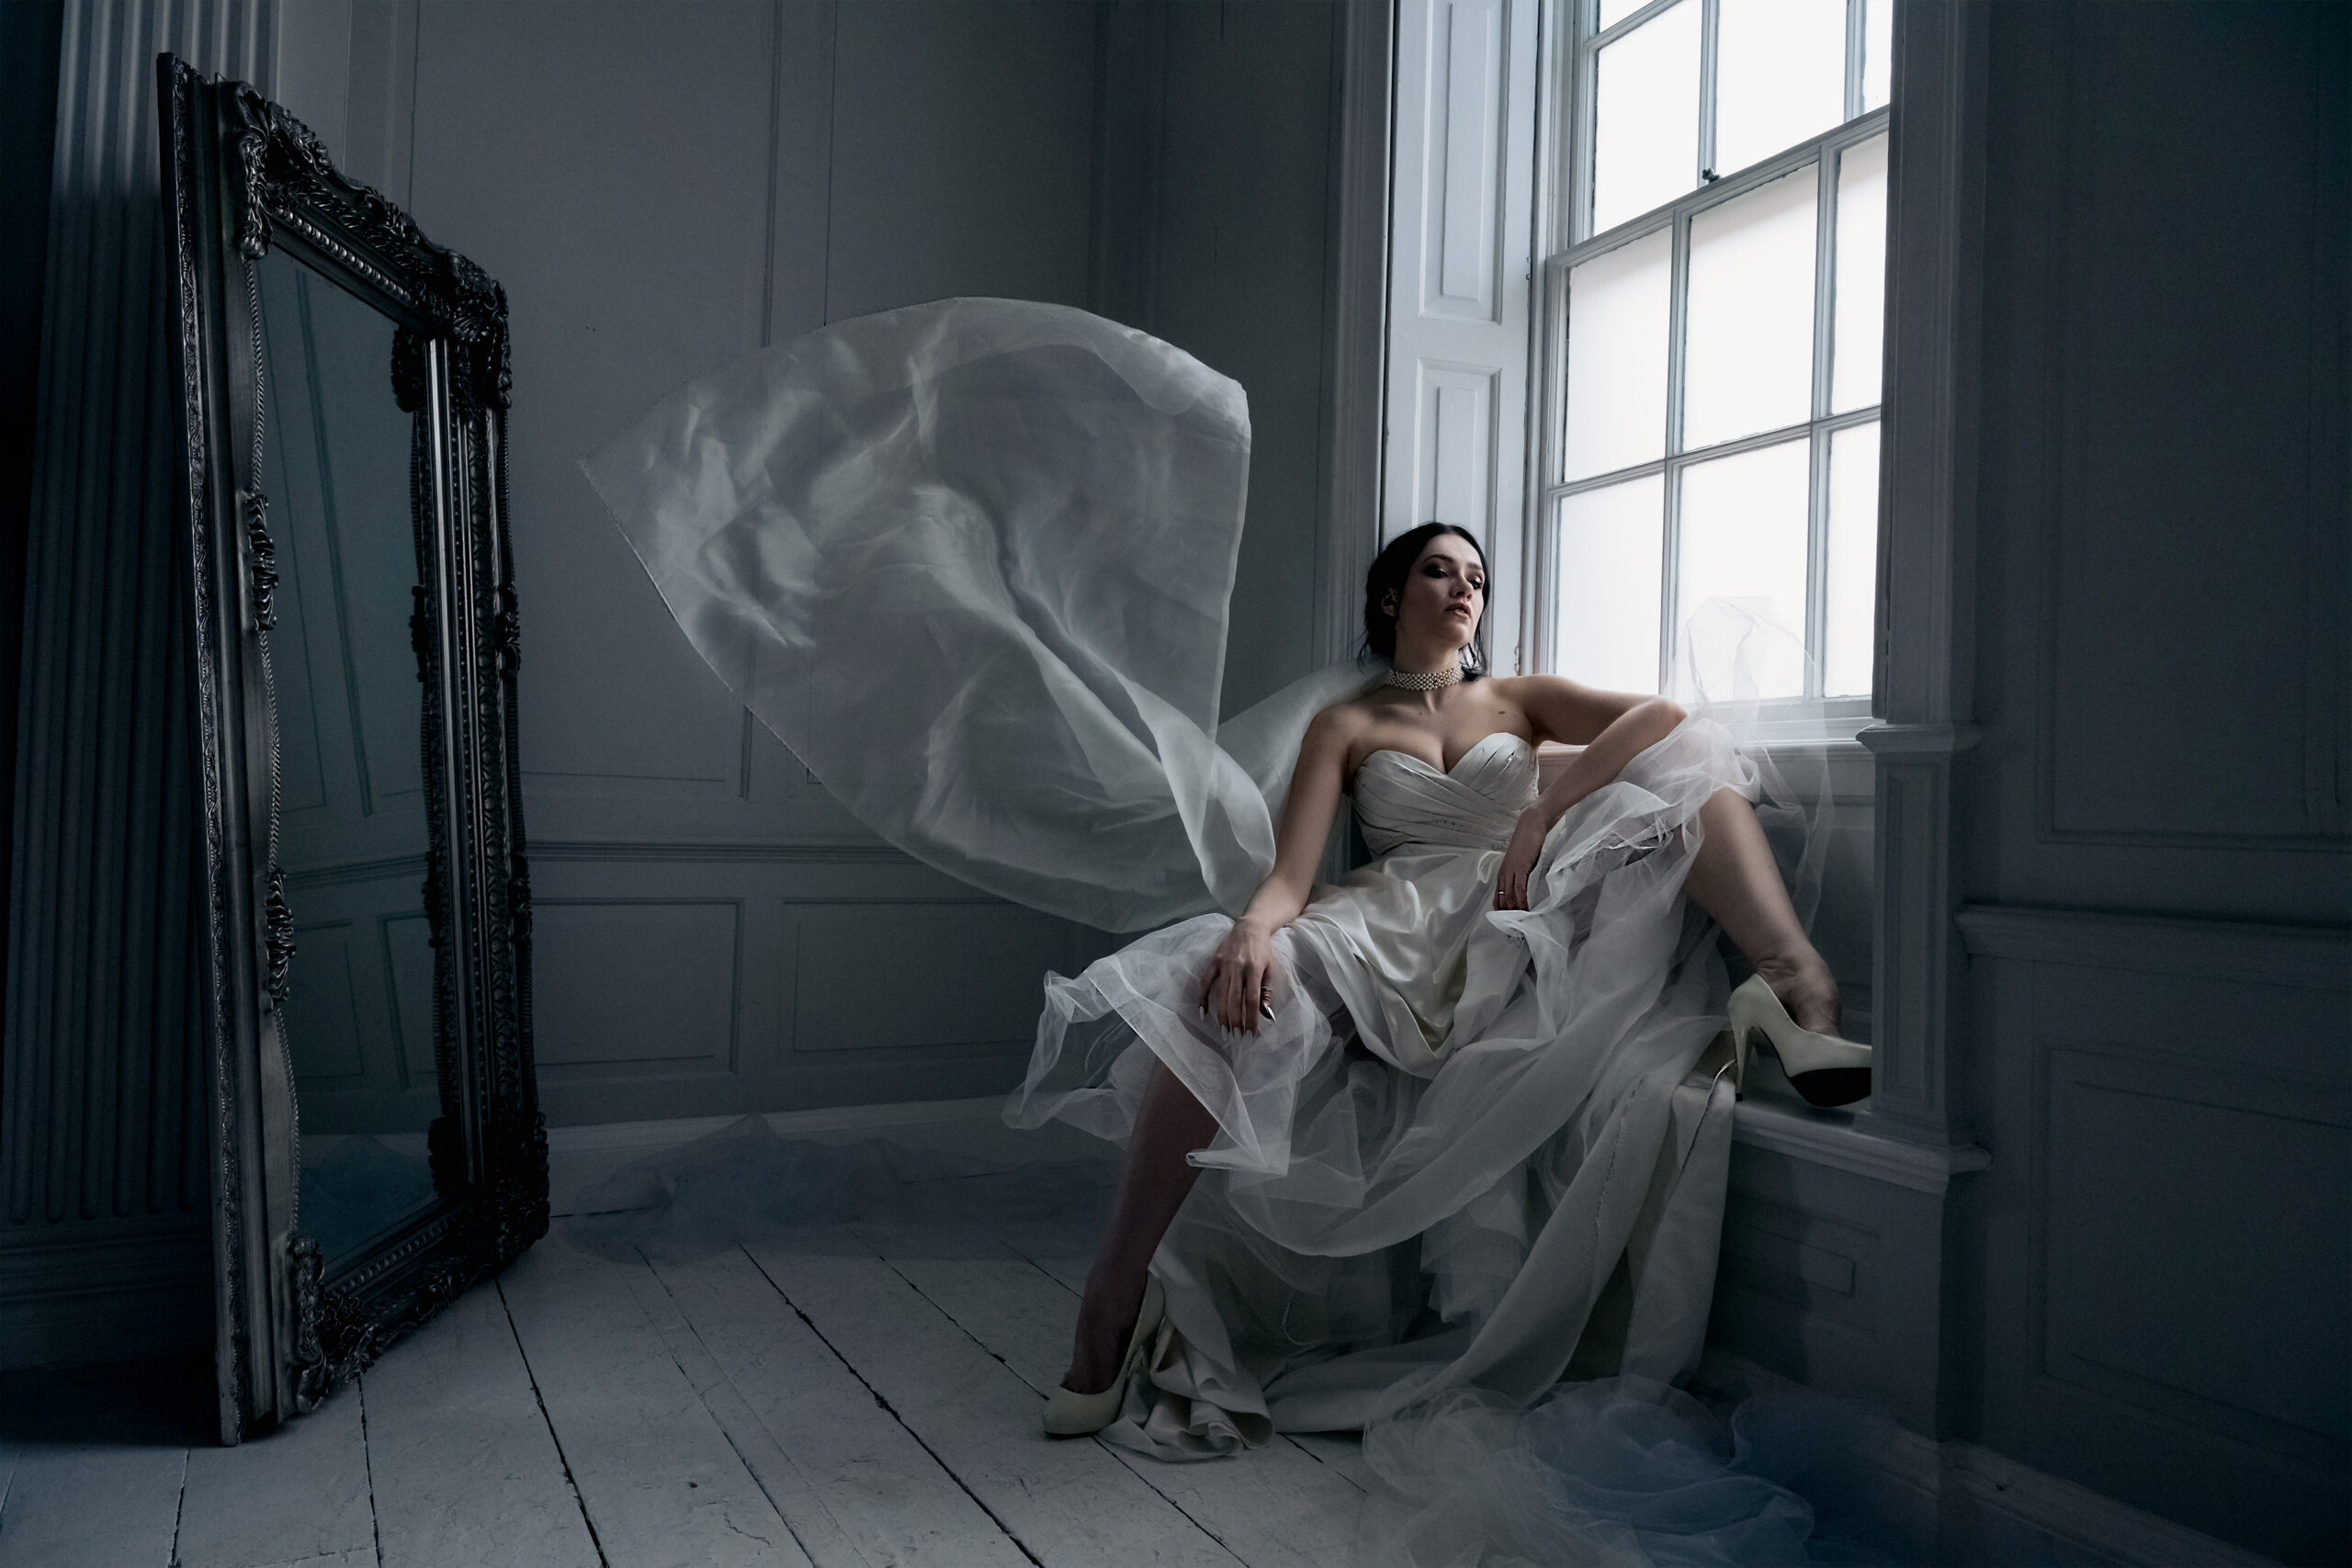 Female, caucasian model sat in wedding gown, with fabric floating mid-air, in a white studio against a large window